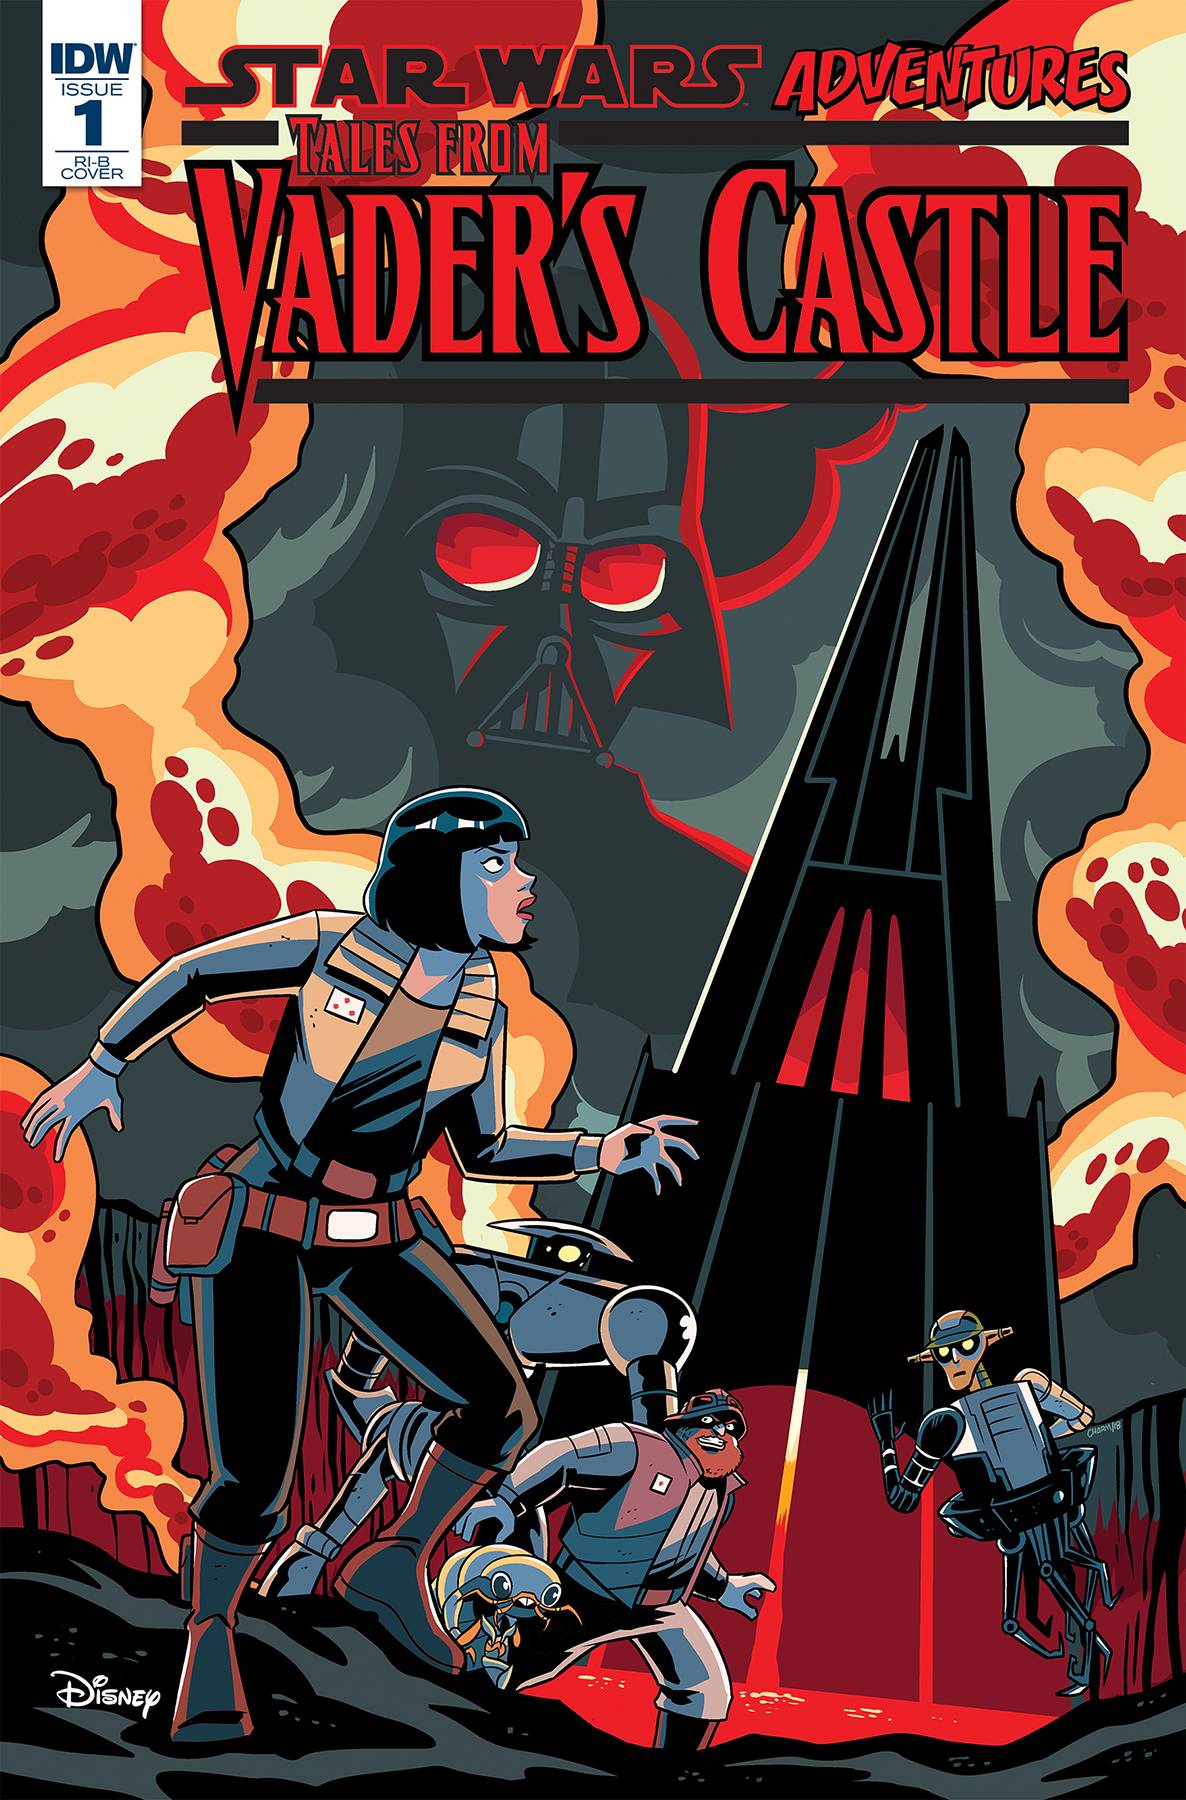 Star Wars Tales From Vaders Castle #1 1 for 100 Incentive Charm (Of 5)